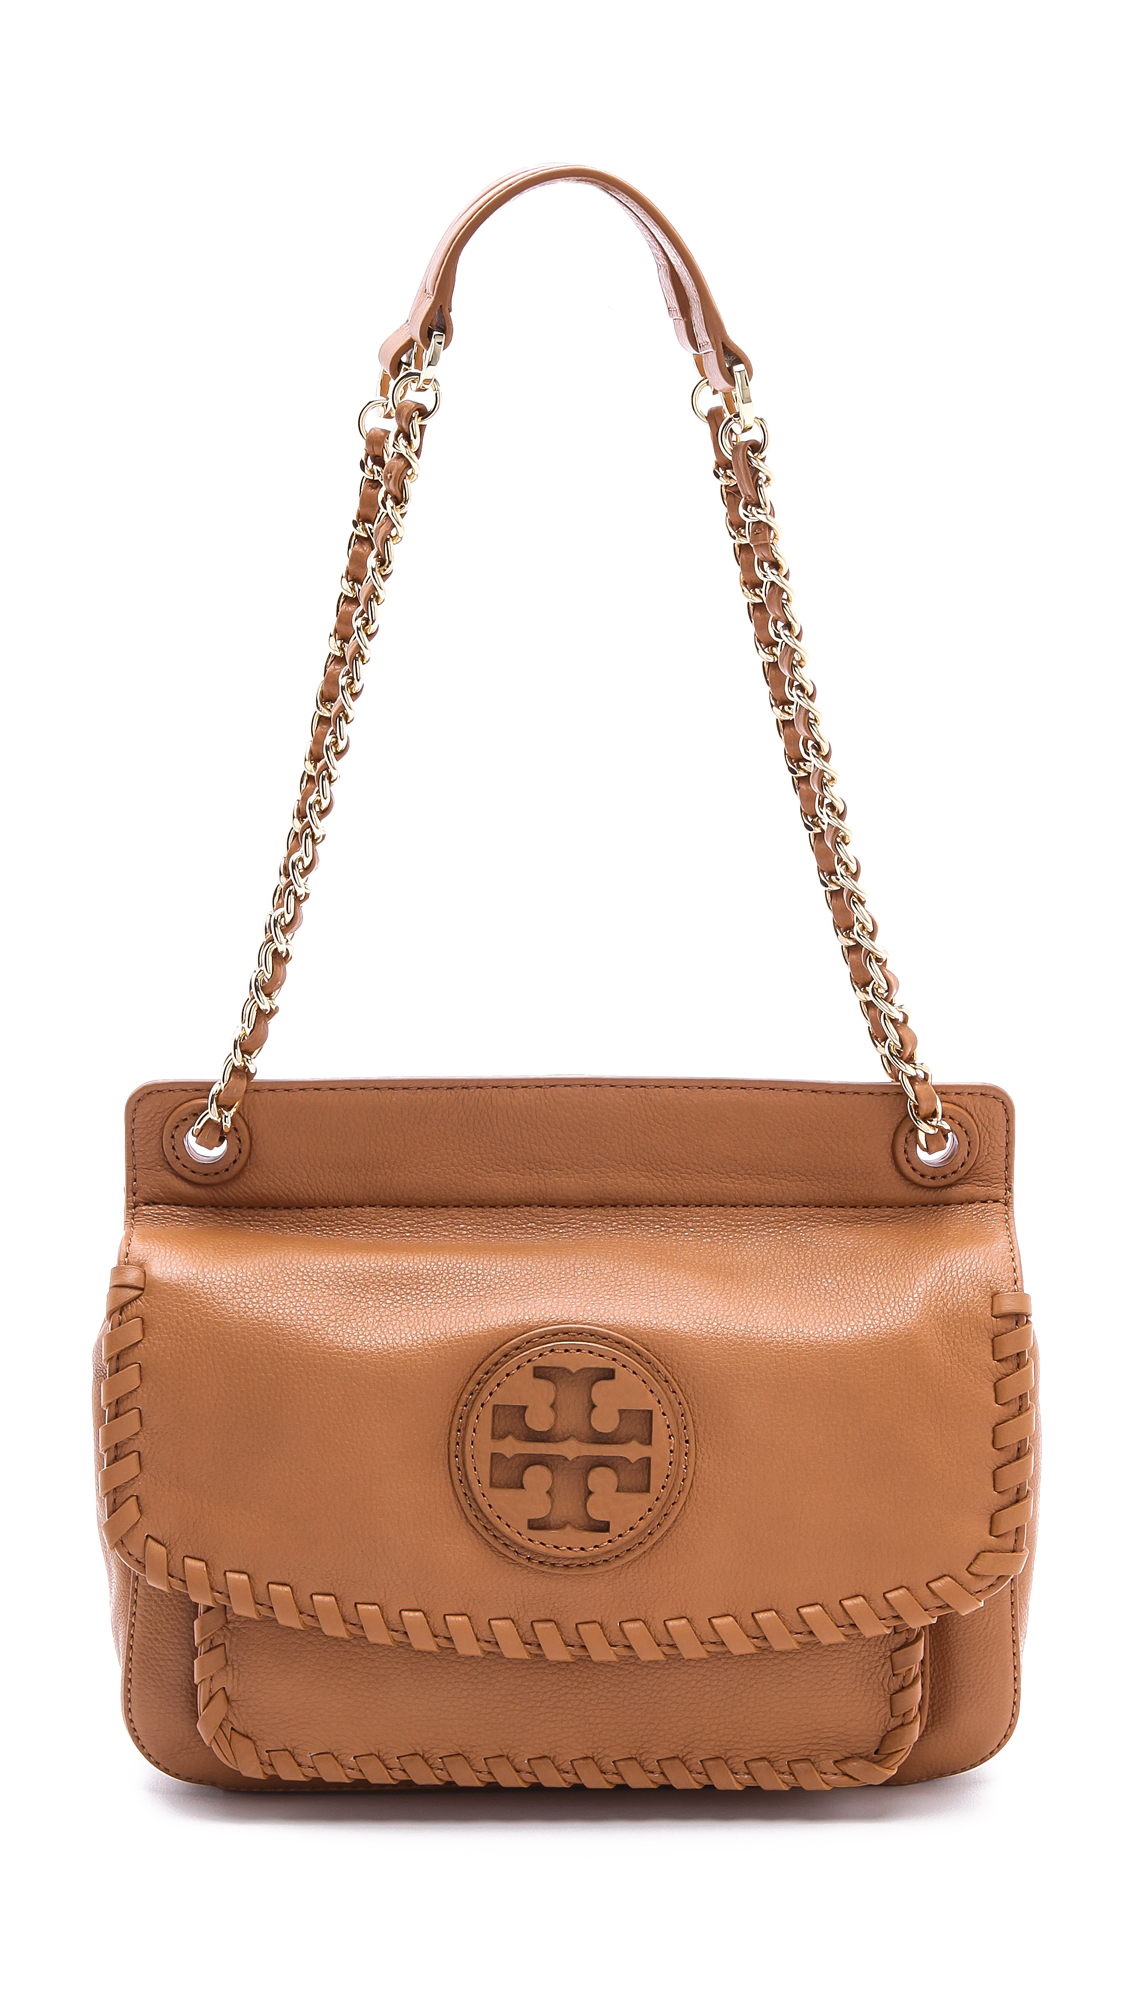 Tory Burch Marion Small Shoulder Bag in Brown | Lyst